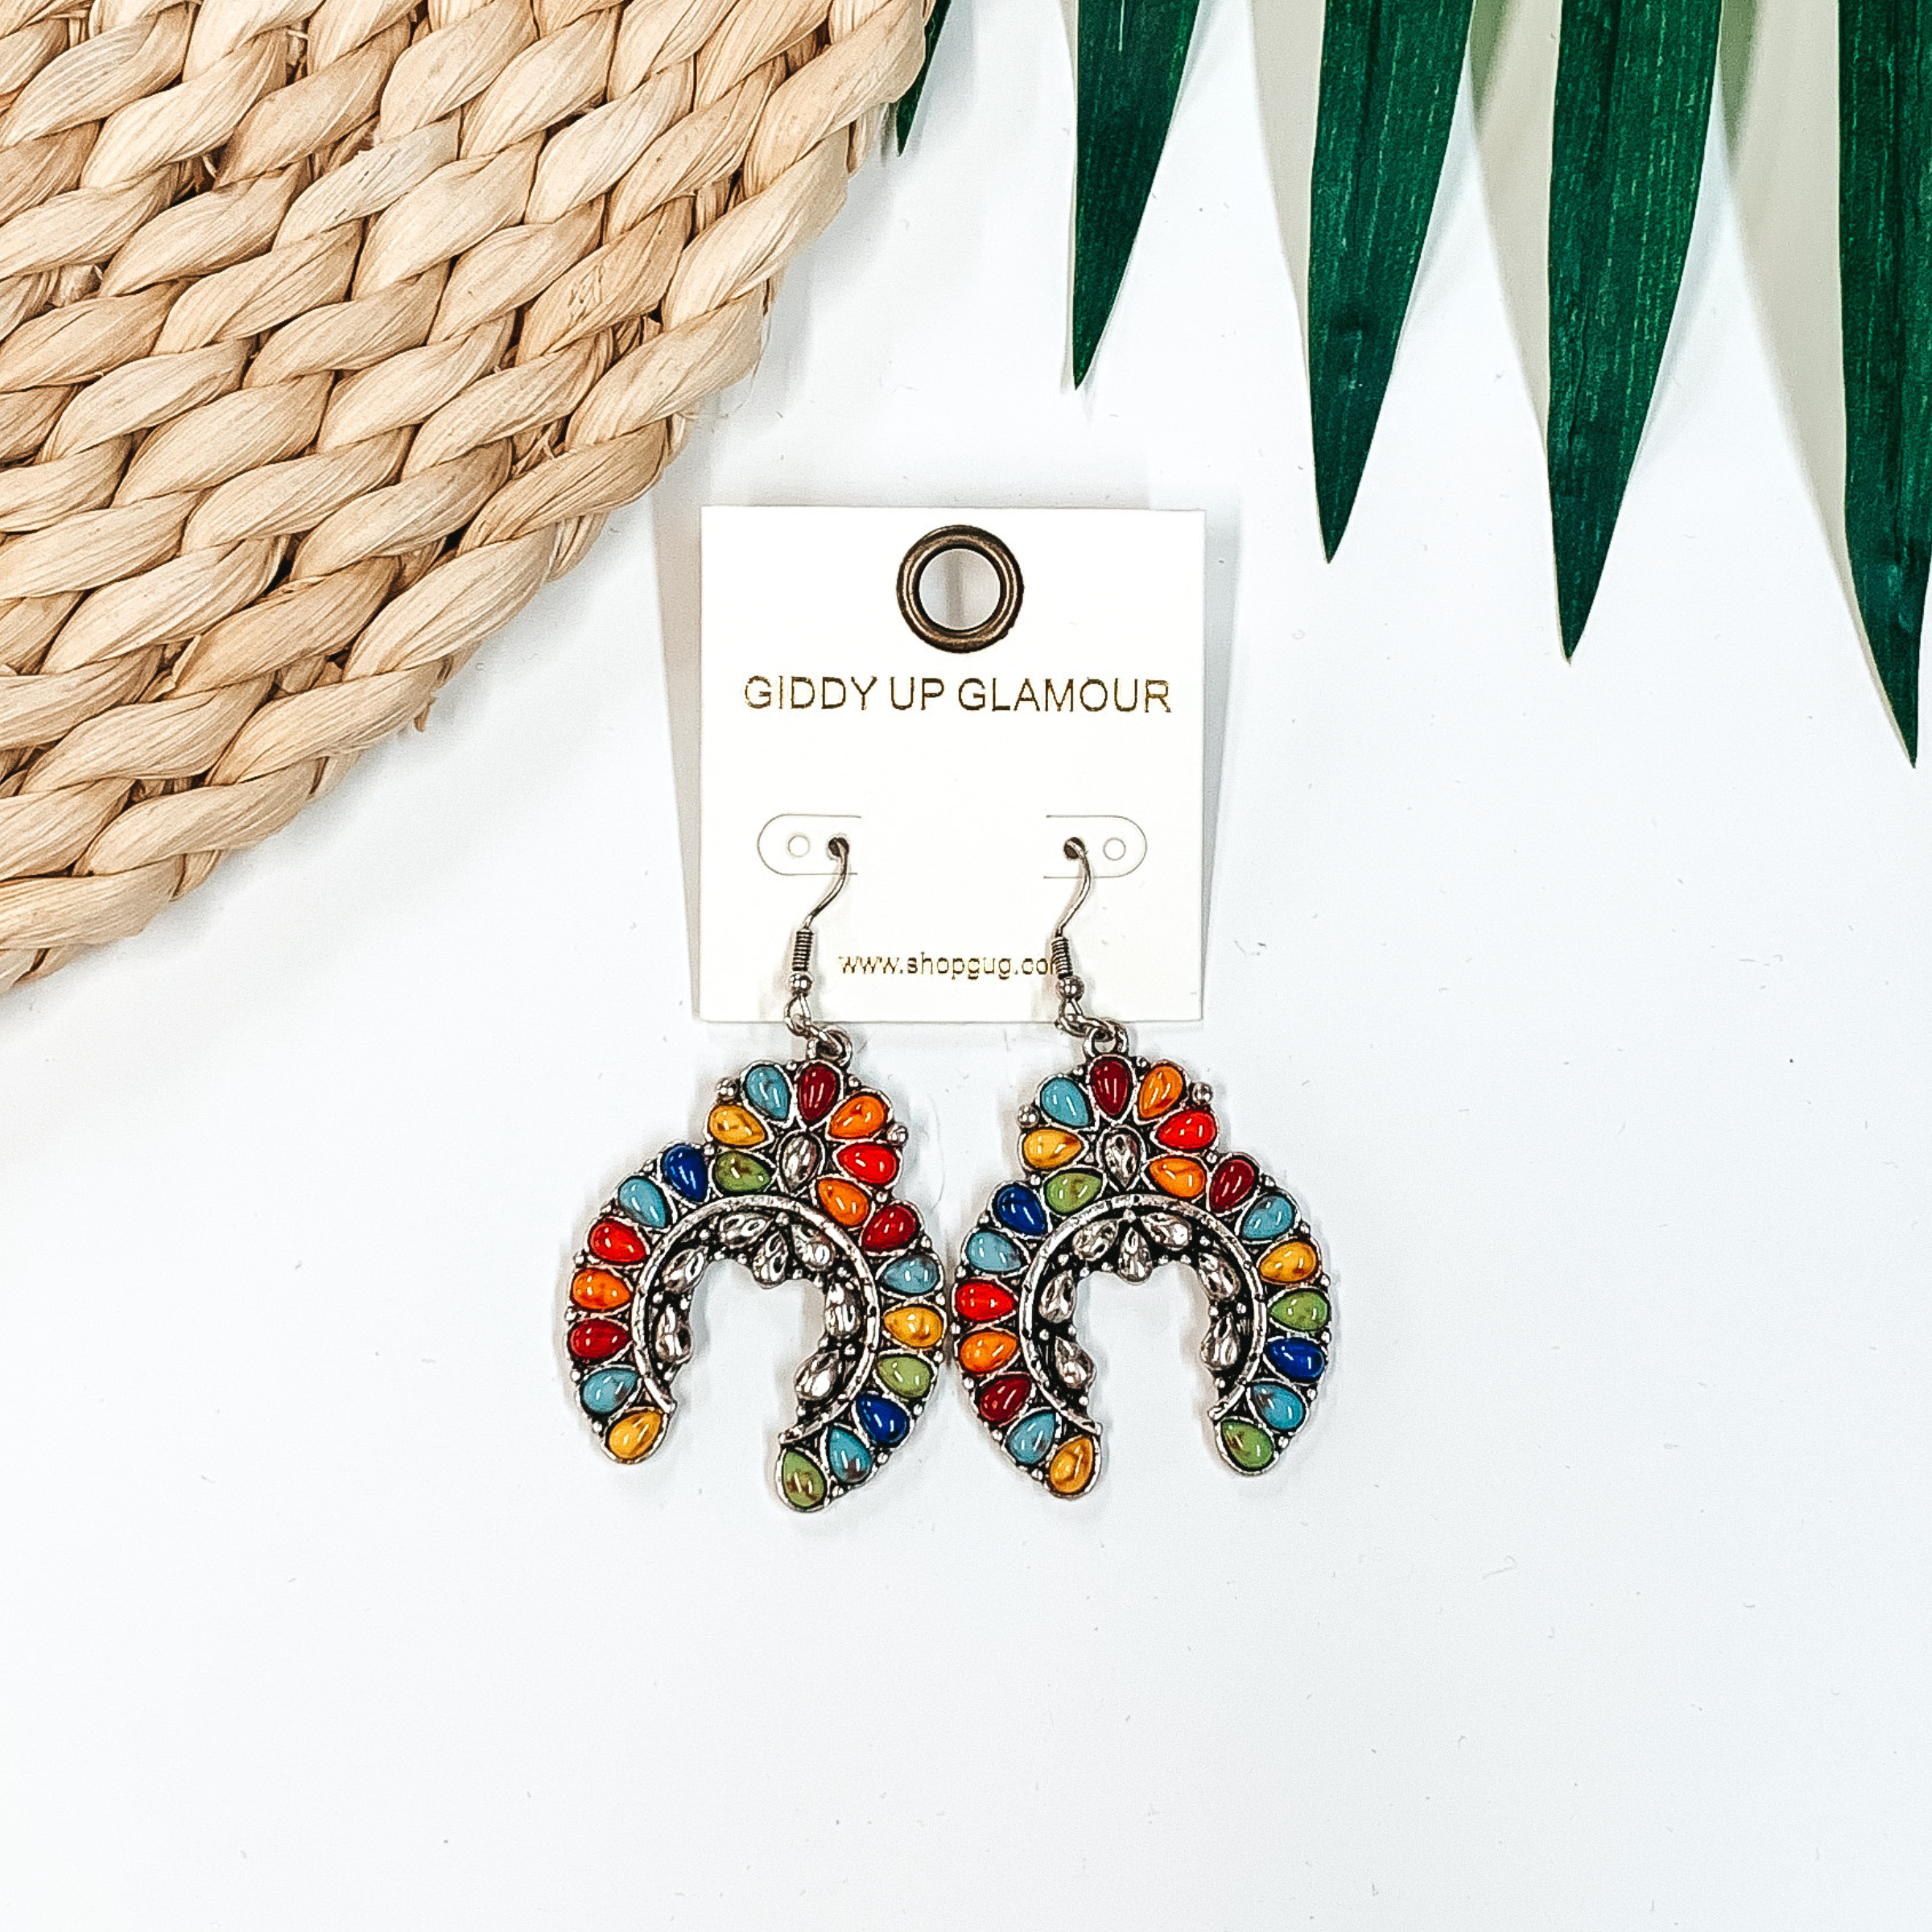 Western Squash Blossom Earrings in Multi - Giddy Up Glamour Boutique